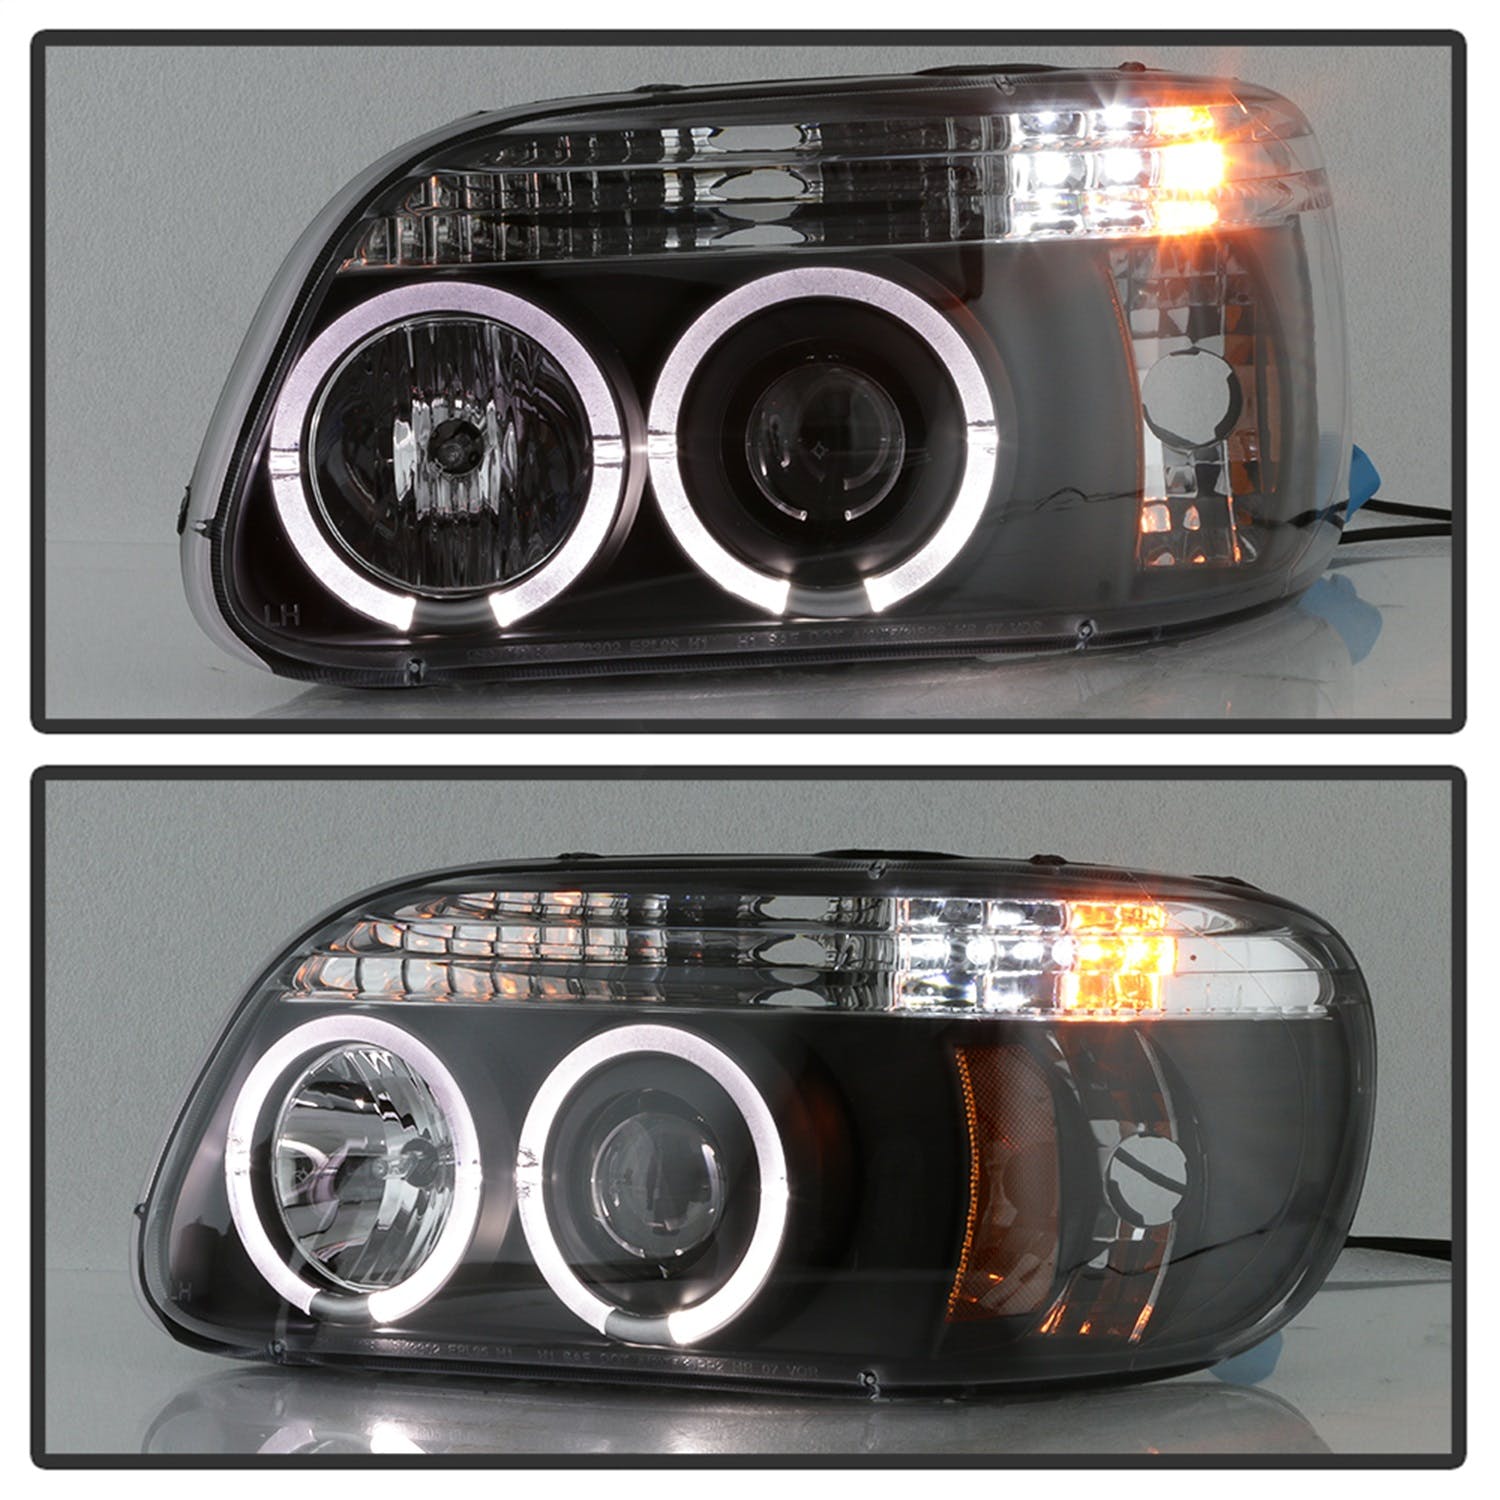 Spyder Auto 5010131 (Spyder) Ford Explorer 95-01 1PC Projector Headlights-LED Halo-Black-High H1 (In